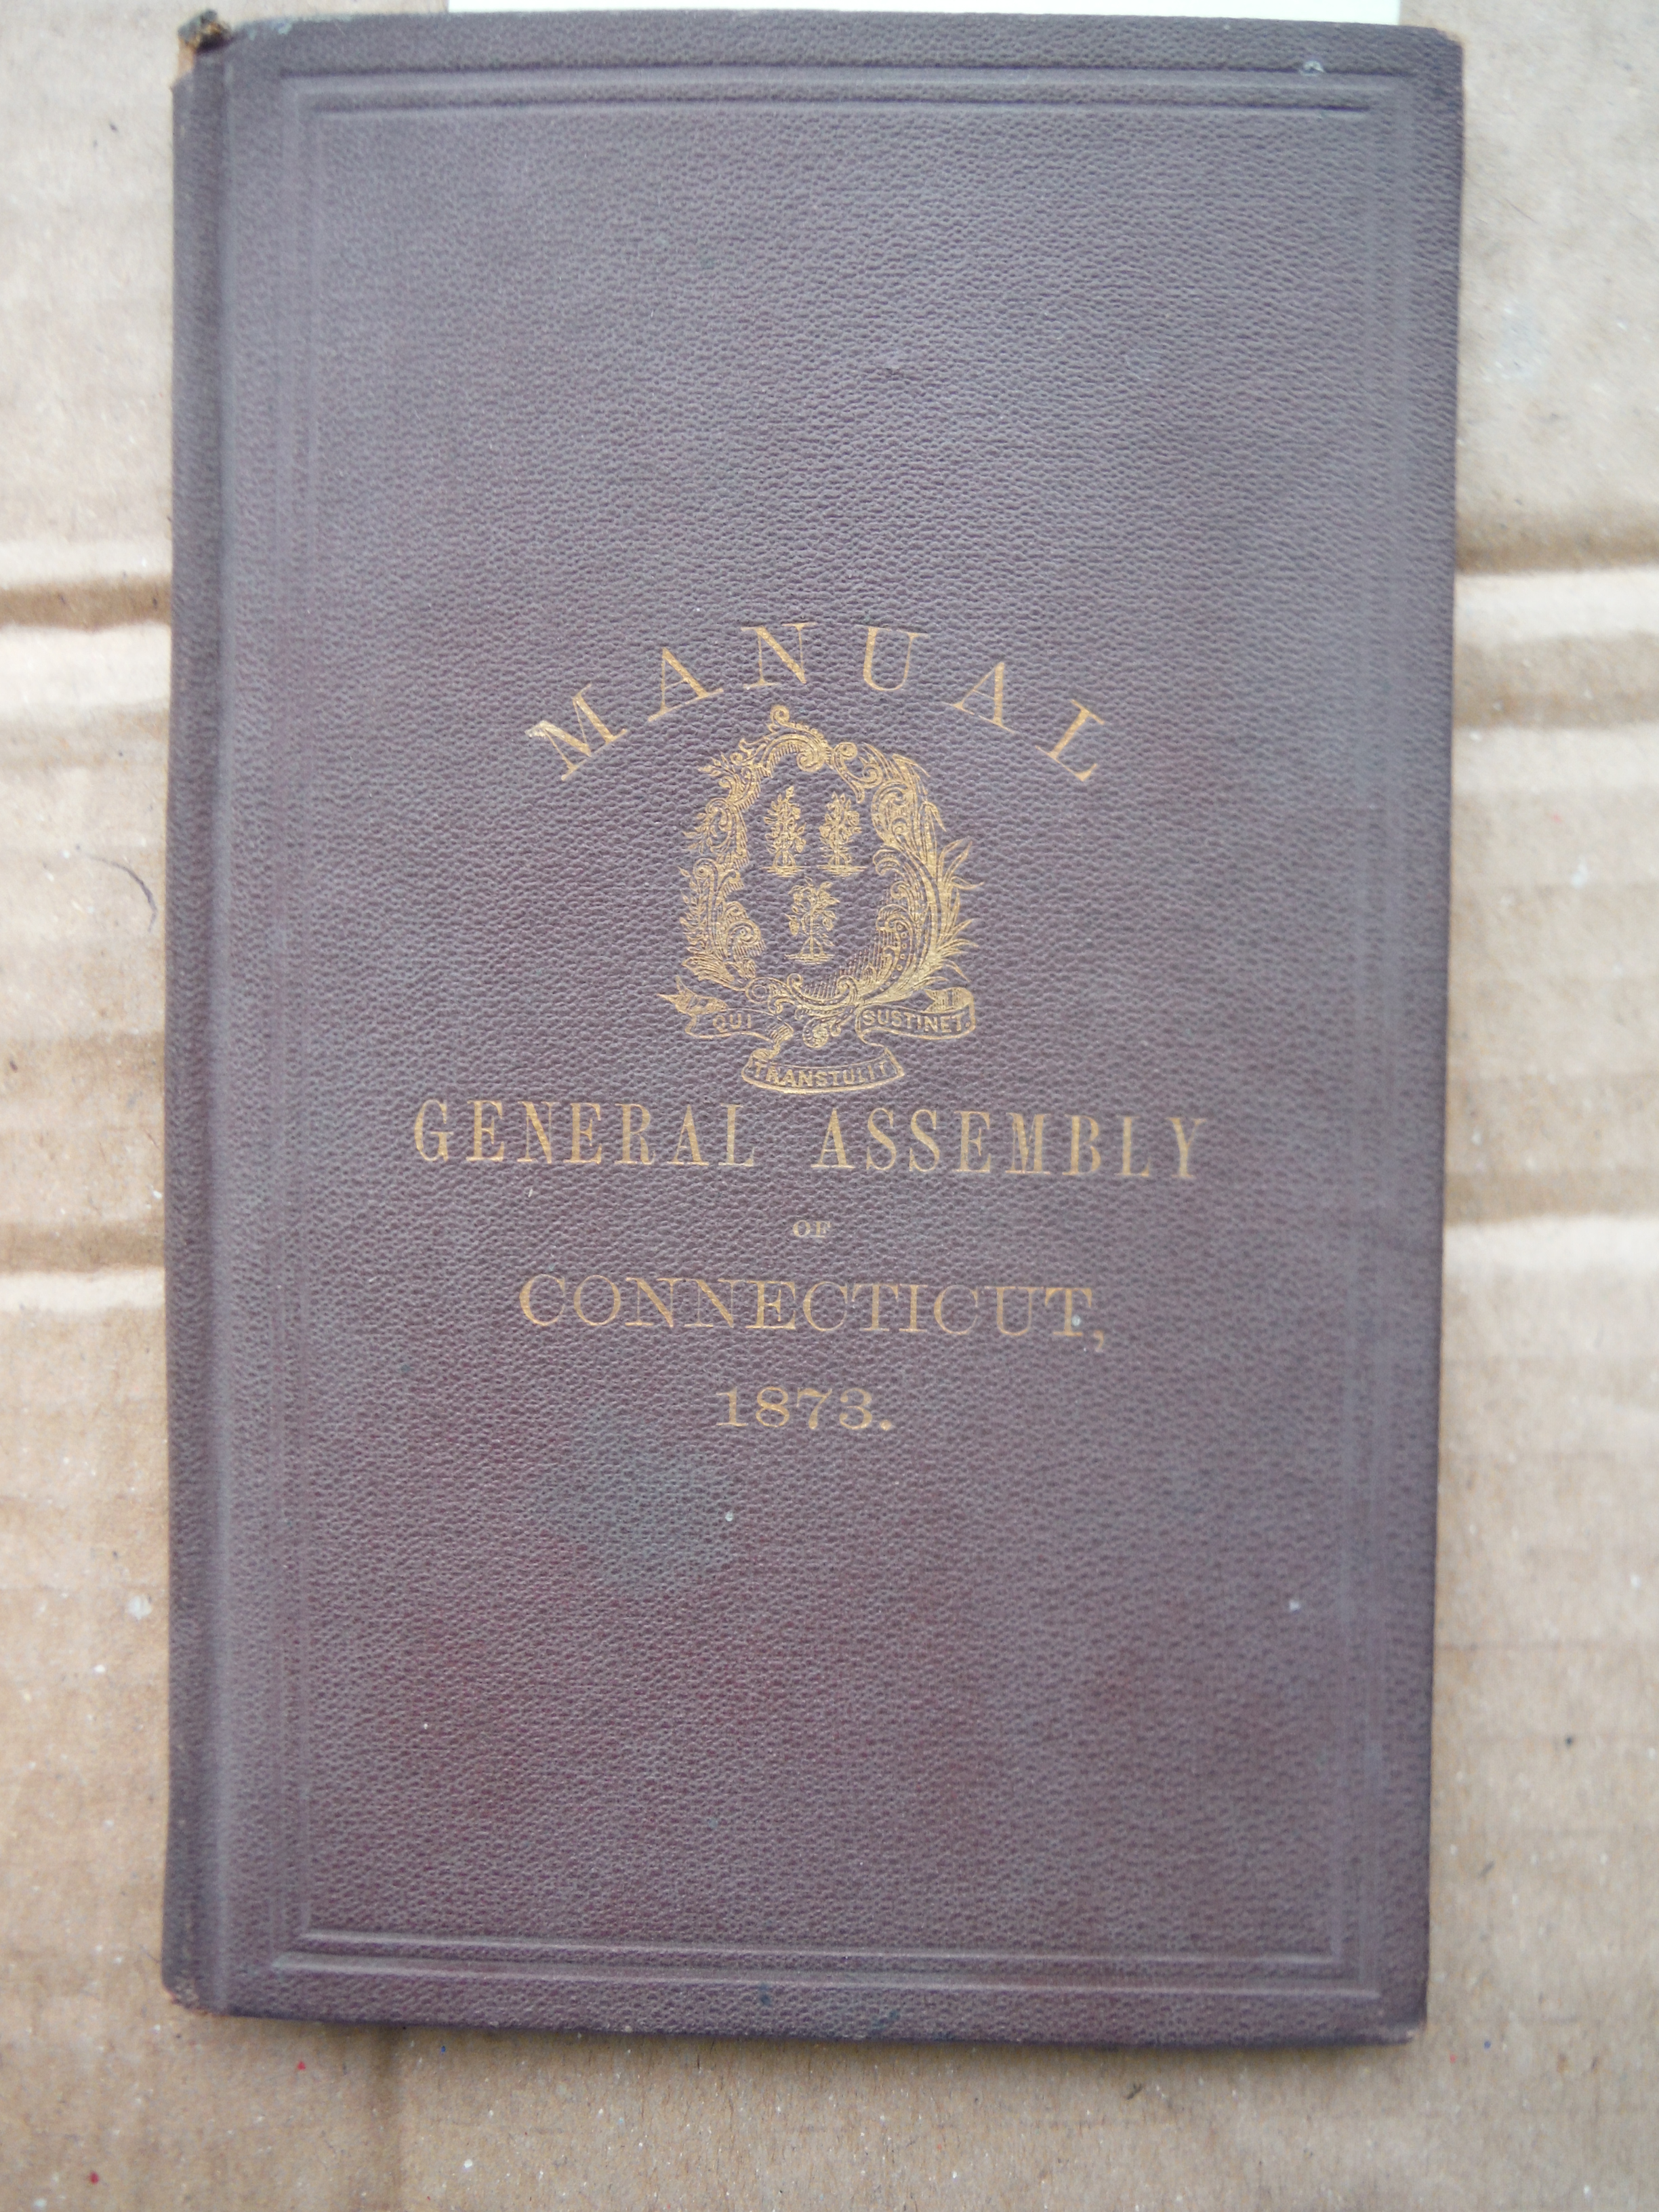 Manual of the General Assembly of Connecticut 1873 